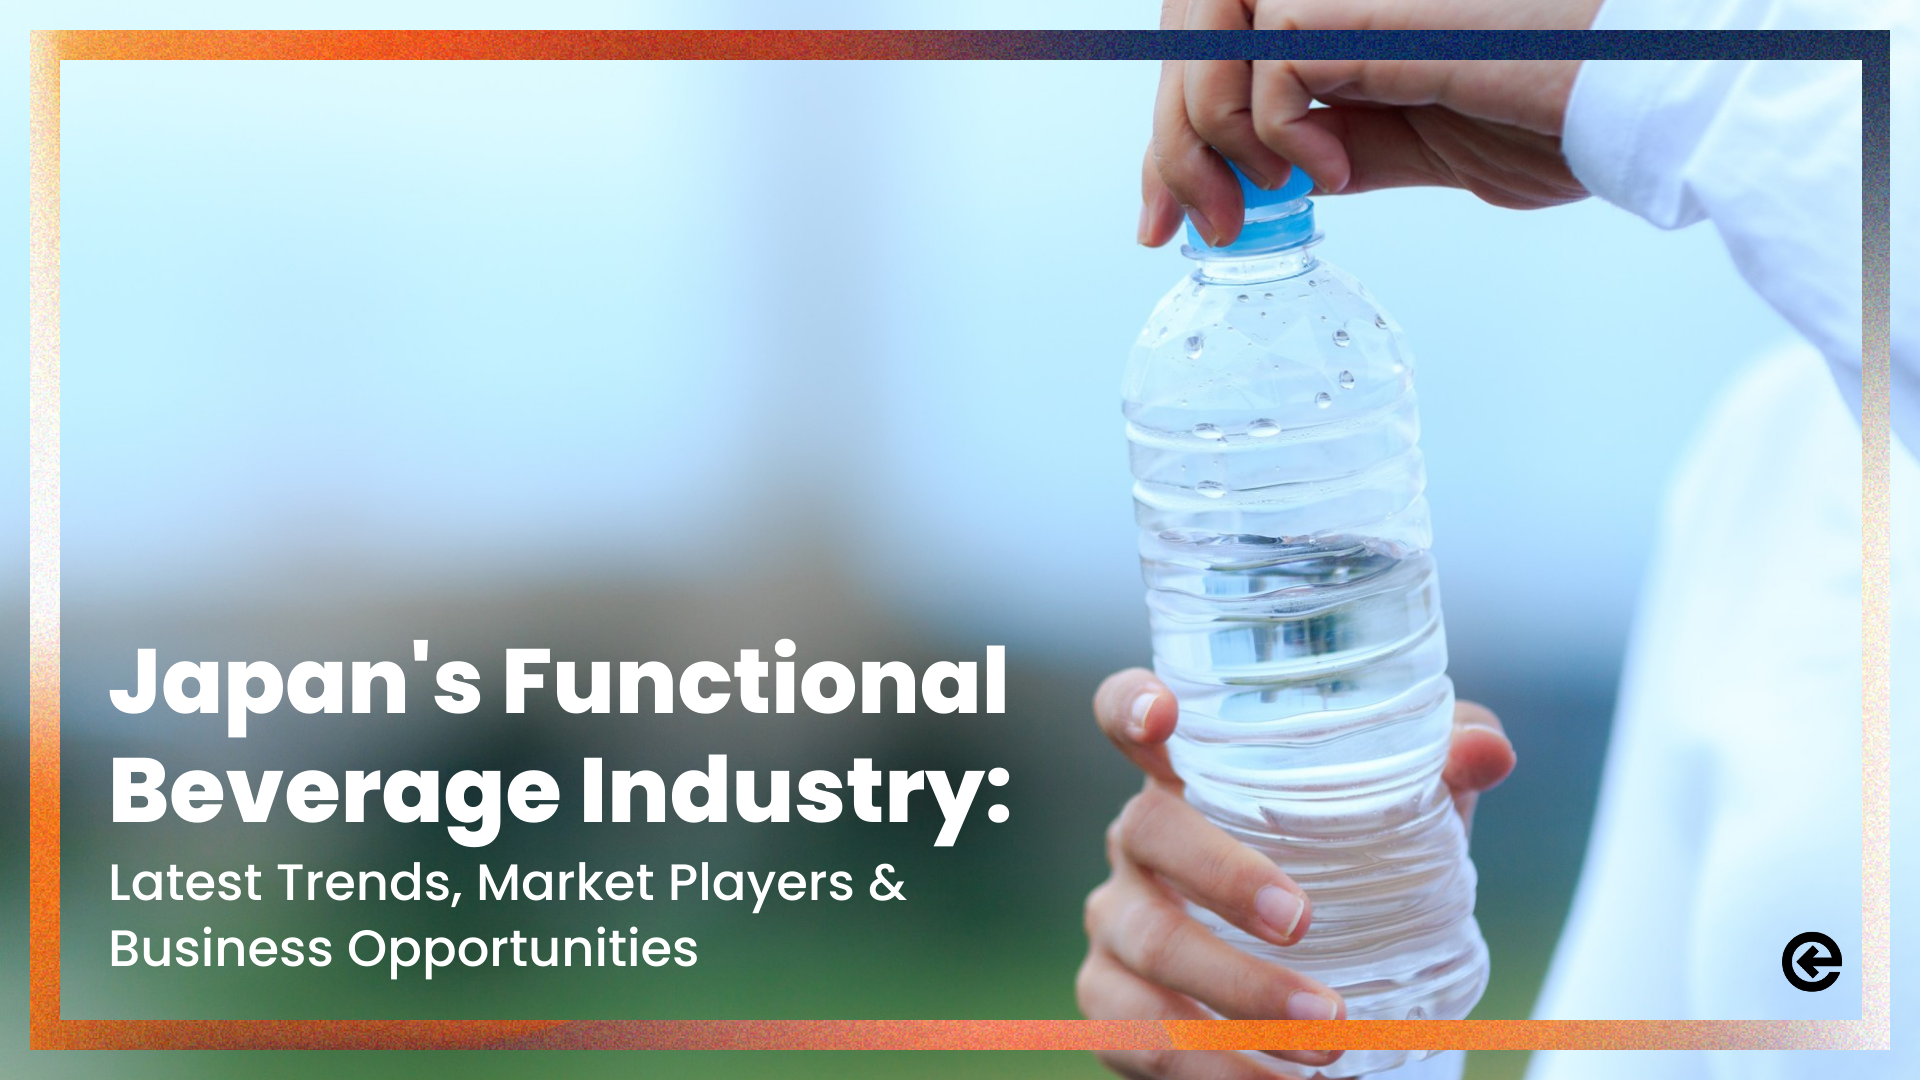 Japan’s Functional Beverage Industry: Trends, Market Players & Business Opportunities